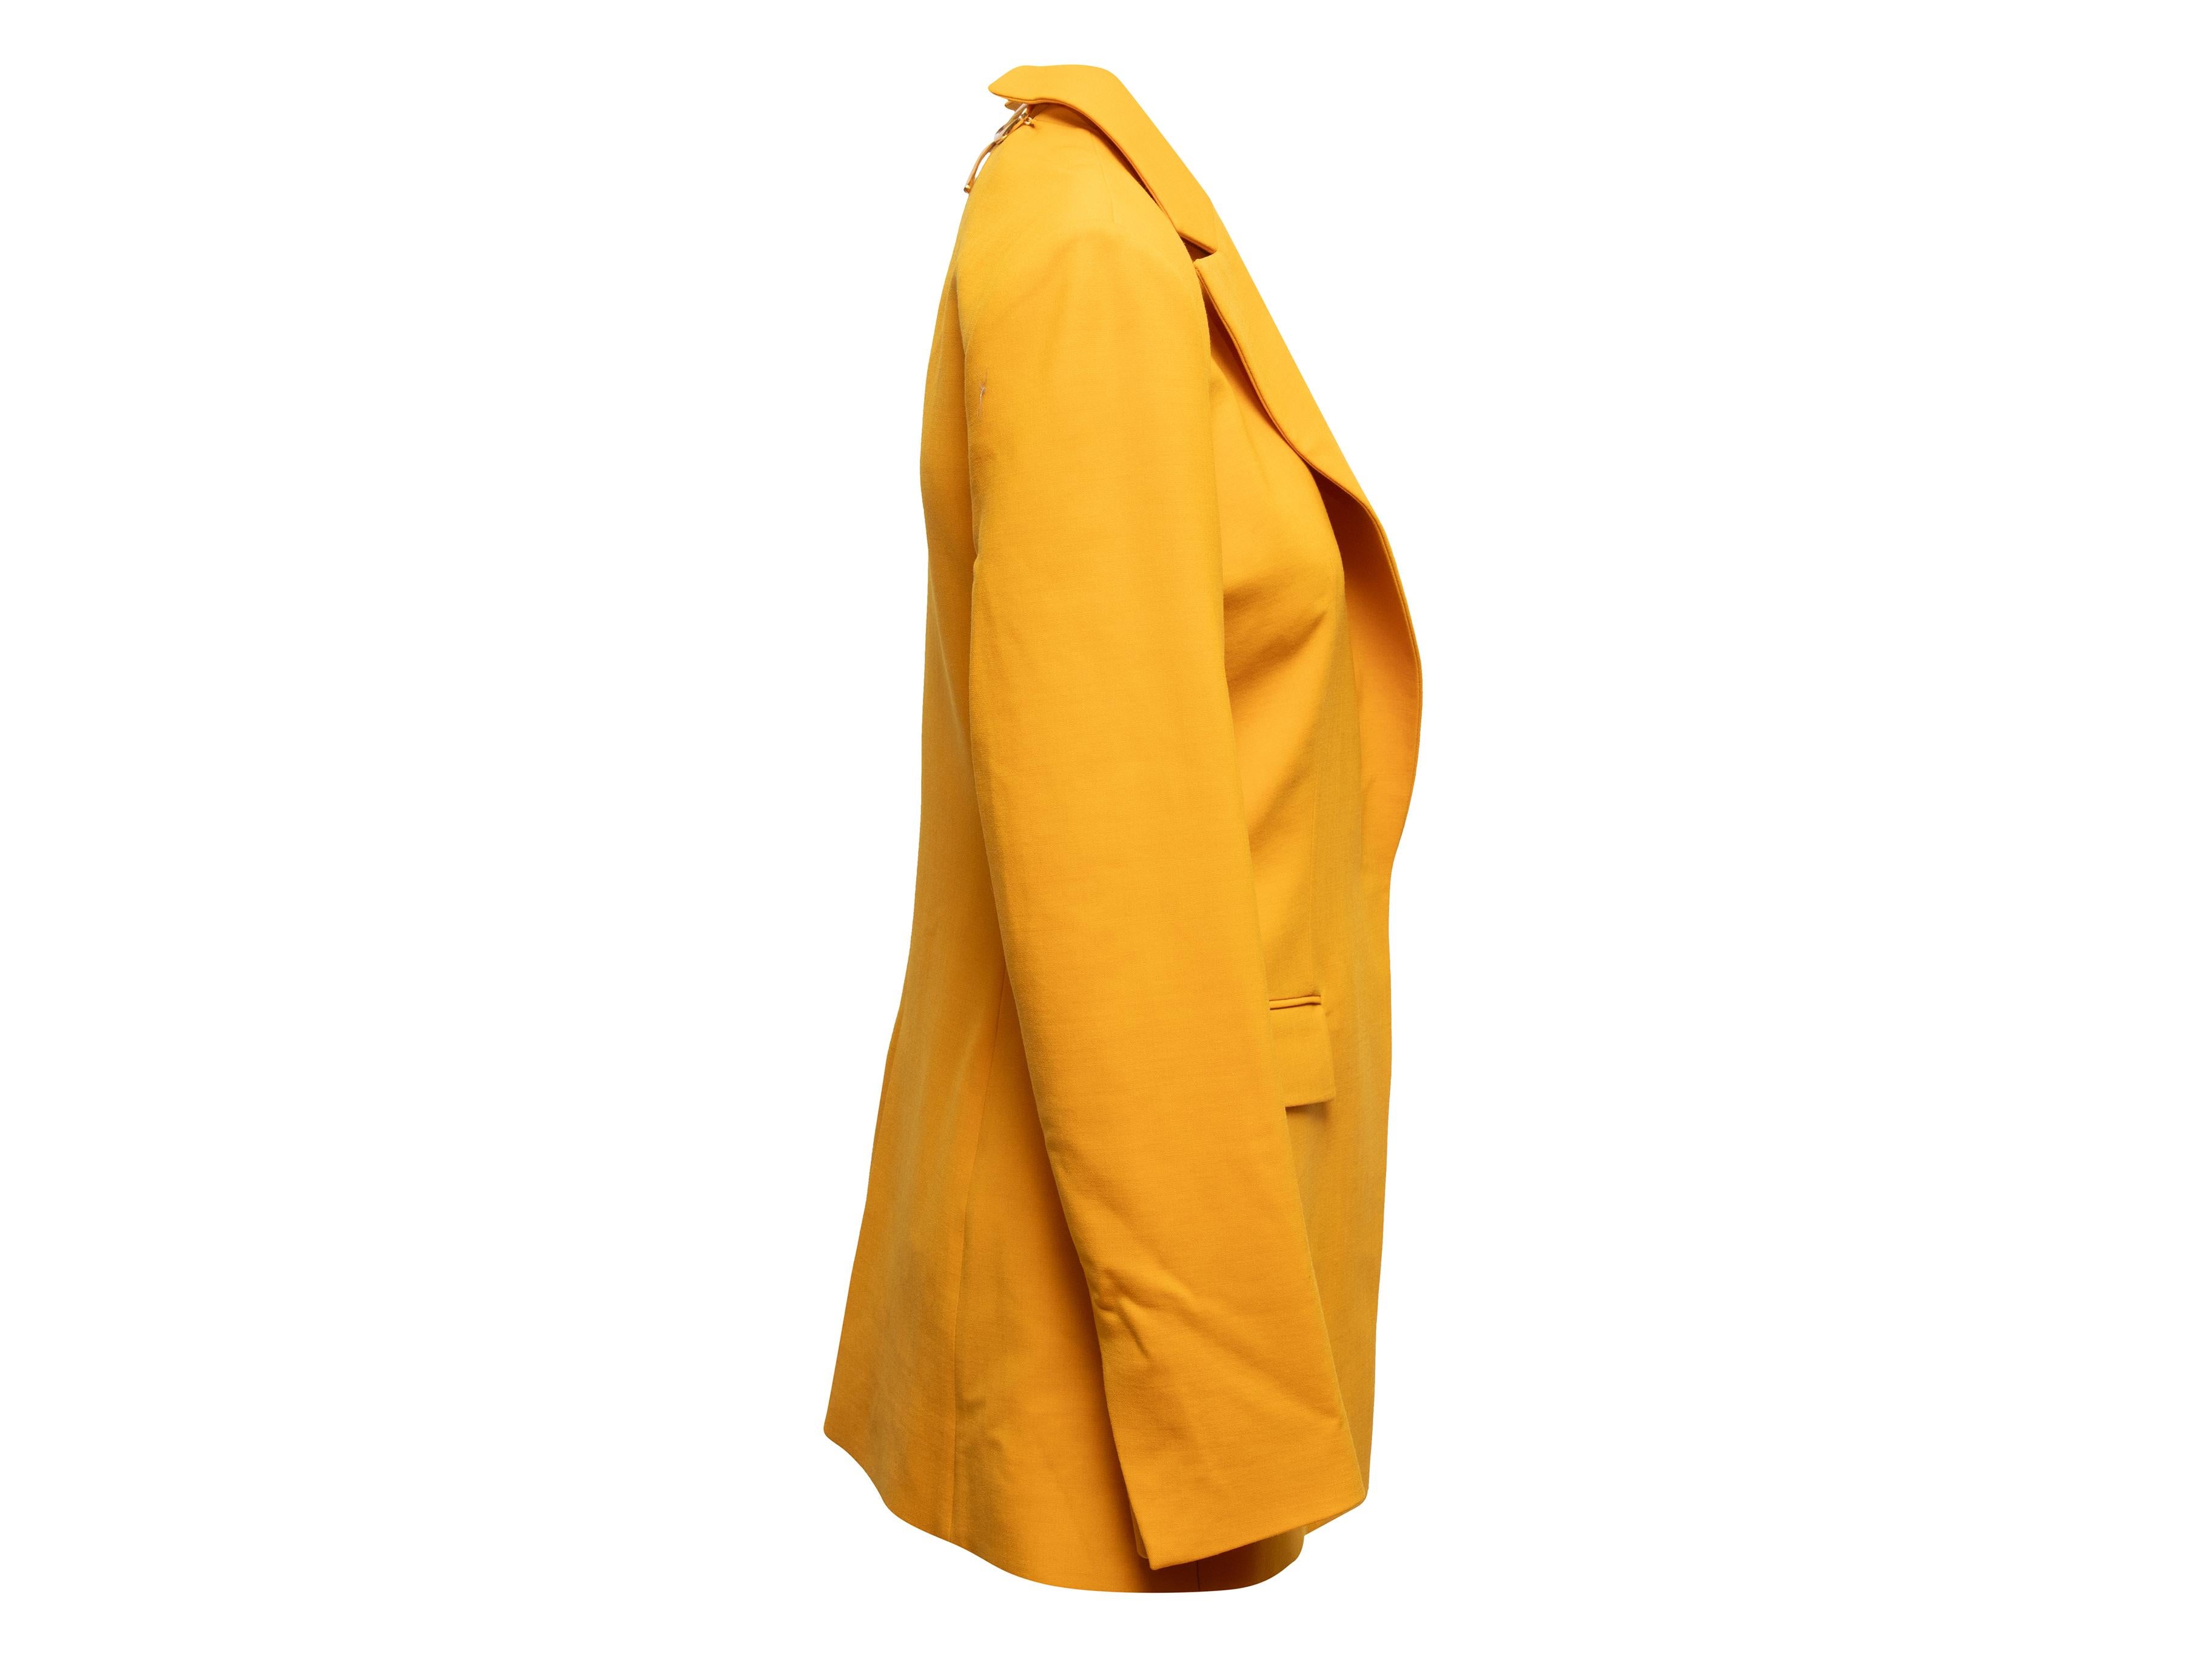 Mustard virgin wool cutout back blazer by Oscar de la Renta. From the Fall 2021 Collection. Notched lapel. Three pockets. Gold-tone metal bow accent at back nape. Concealed front closure. 36